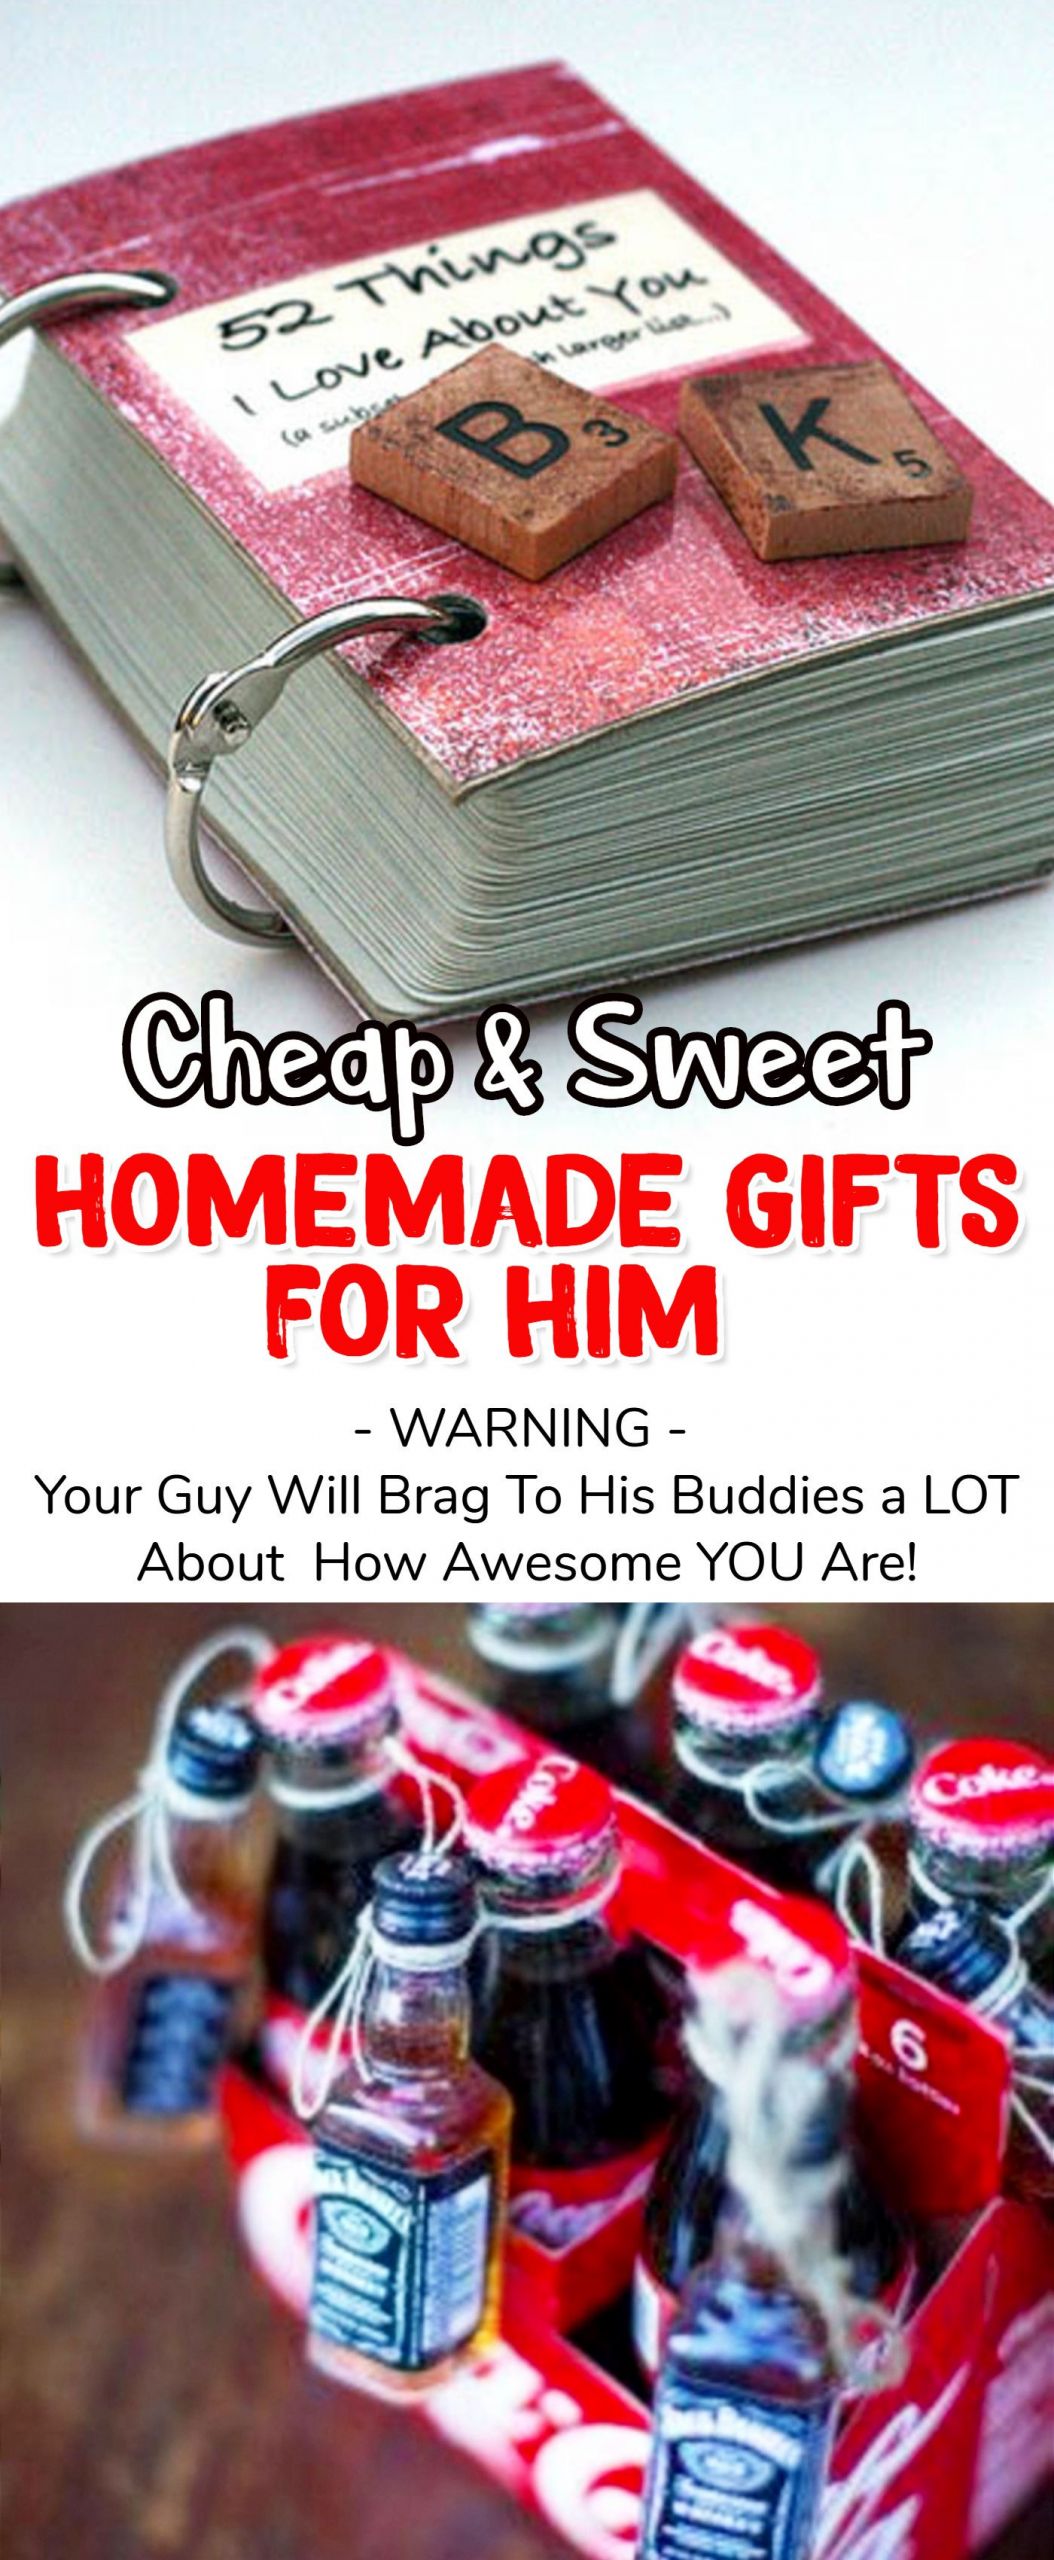 Simple Gift Ideas For Boyfriend
 Homemade Gift Ideas For Him 26 Romantic DIY Gifts To